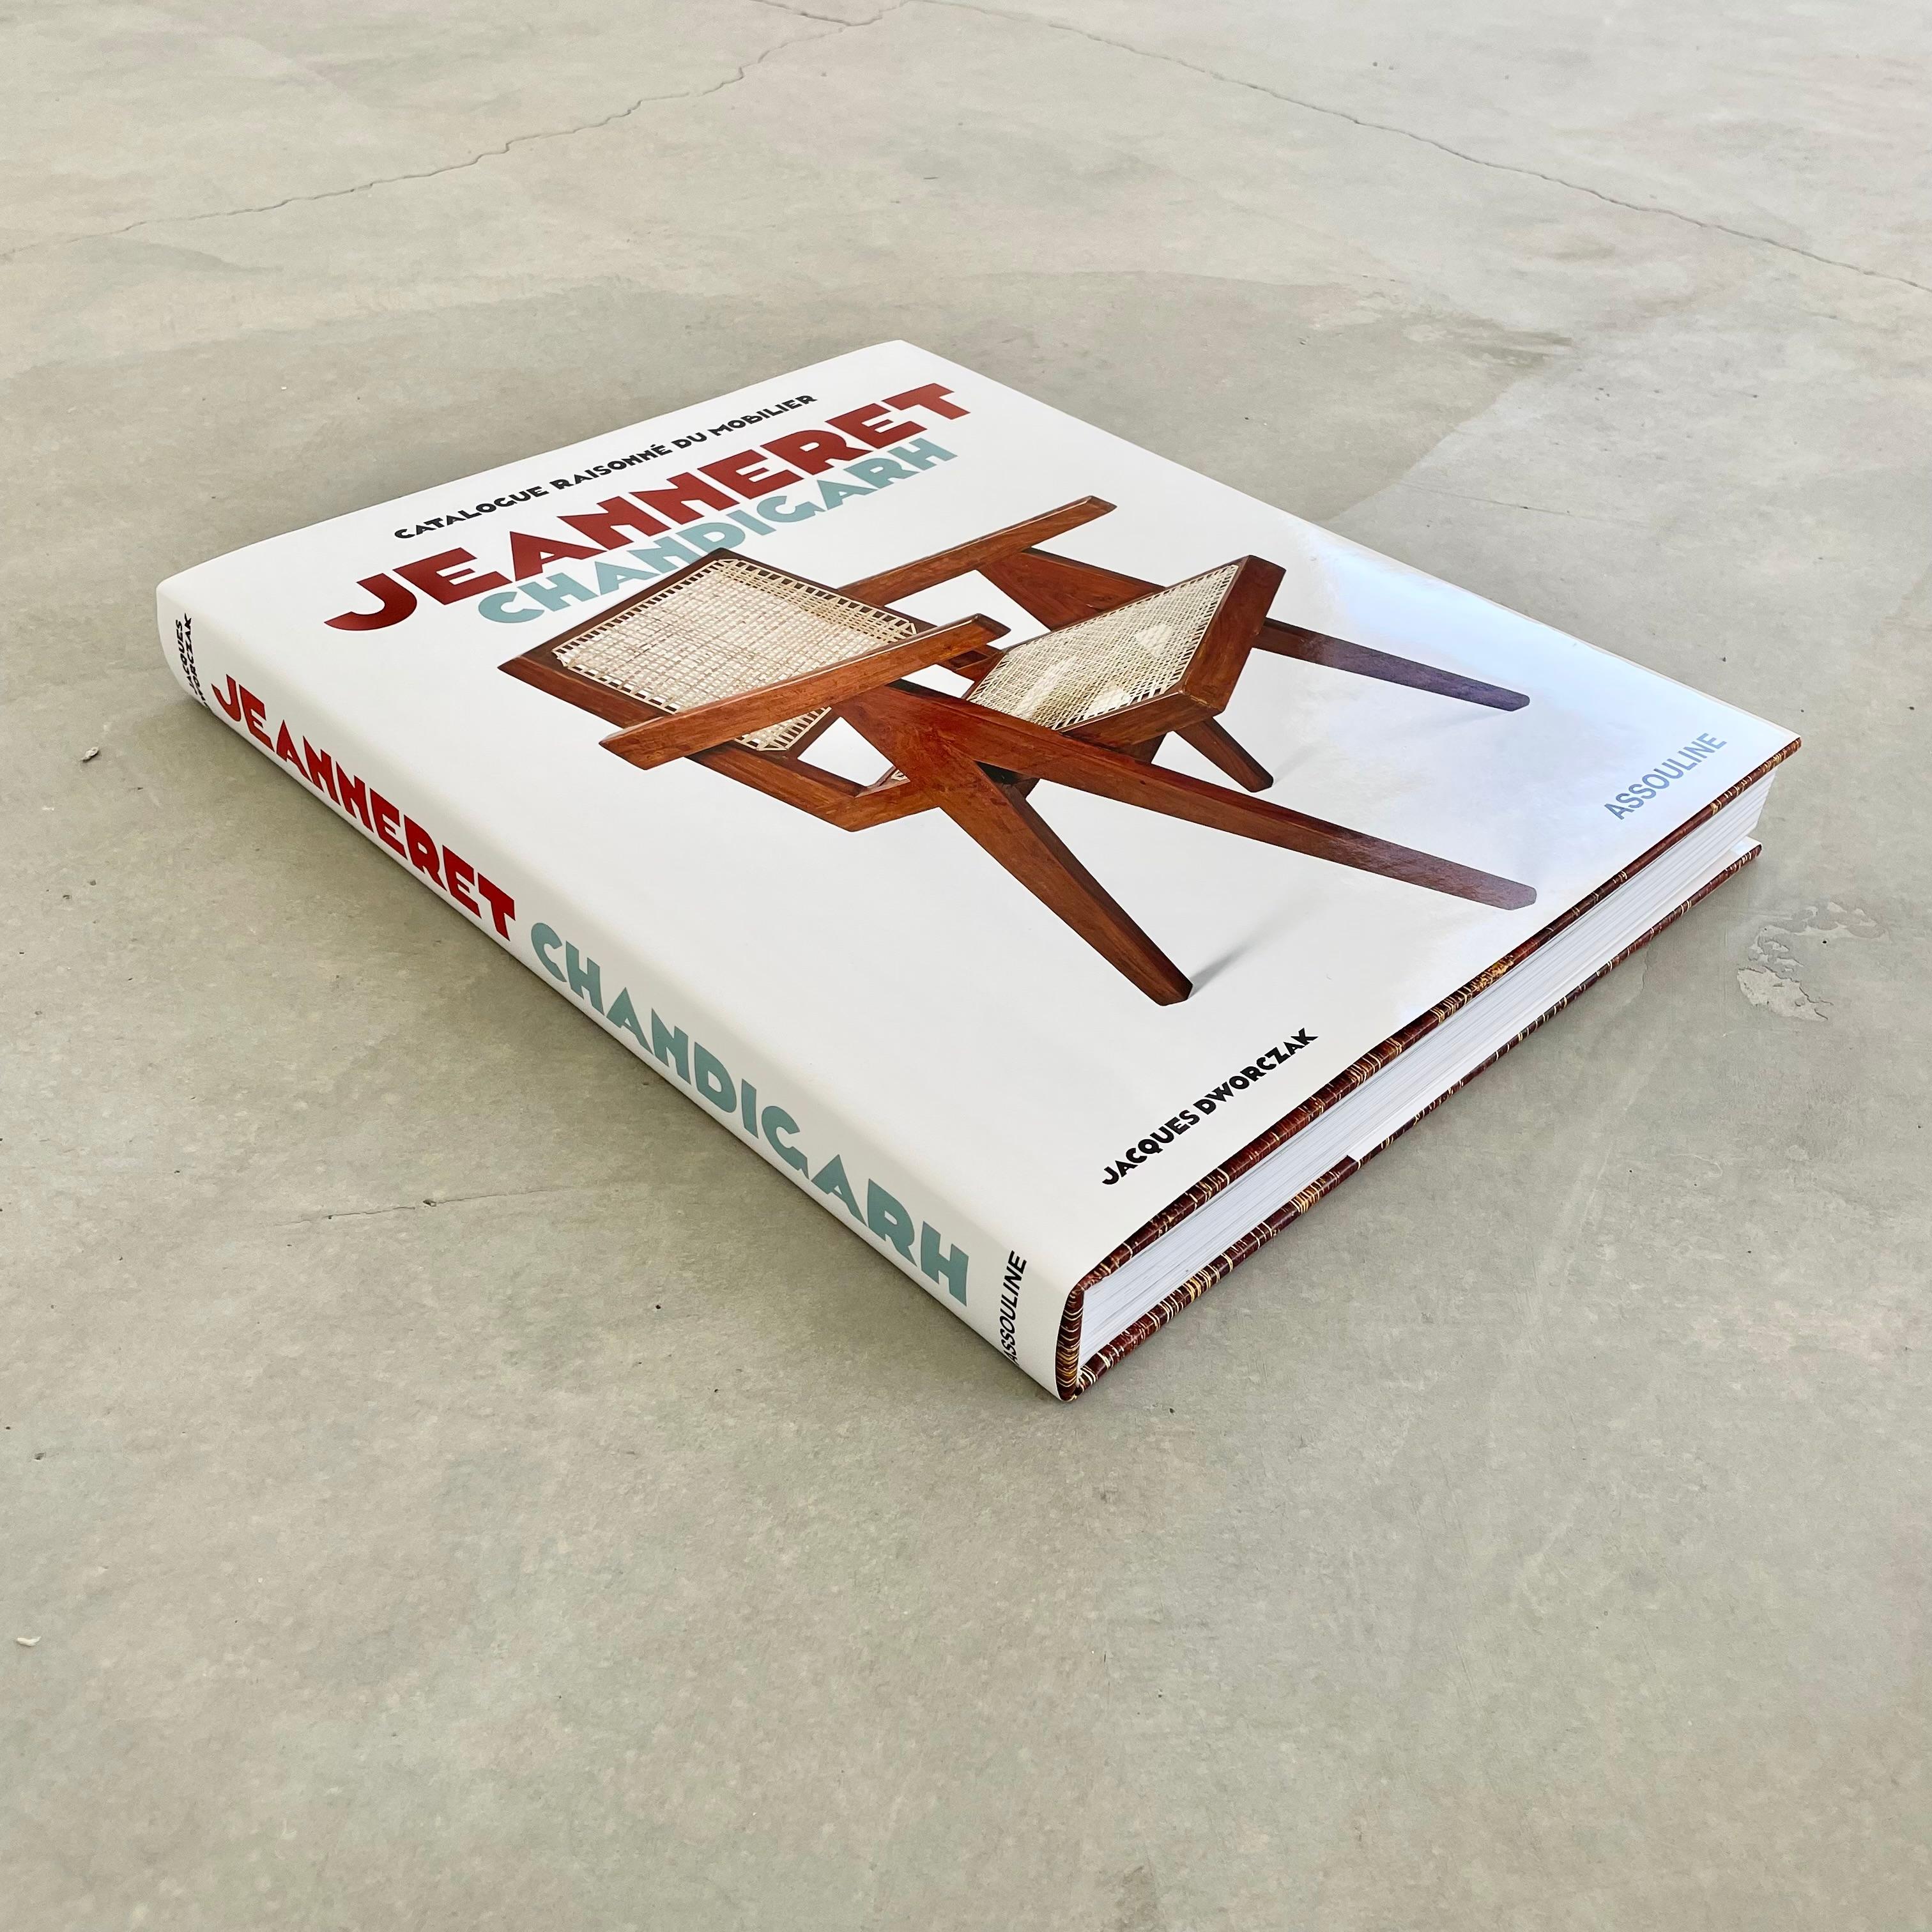 Massive coffee table book on the works of Pierre Jeanneret and his cousin, Le Corbusier, in Chandigarh, India. Printed in the USA and published by Assouline. 379 page book written in French and English with numerous drawings, photographs and stories